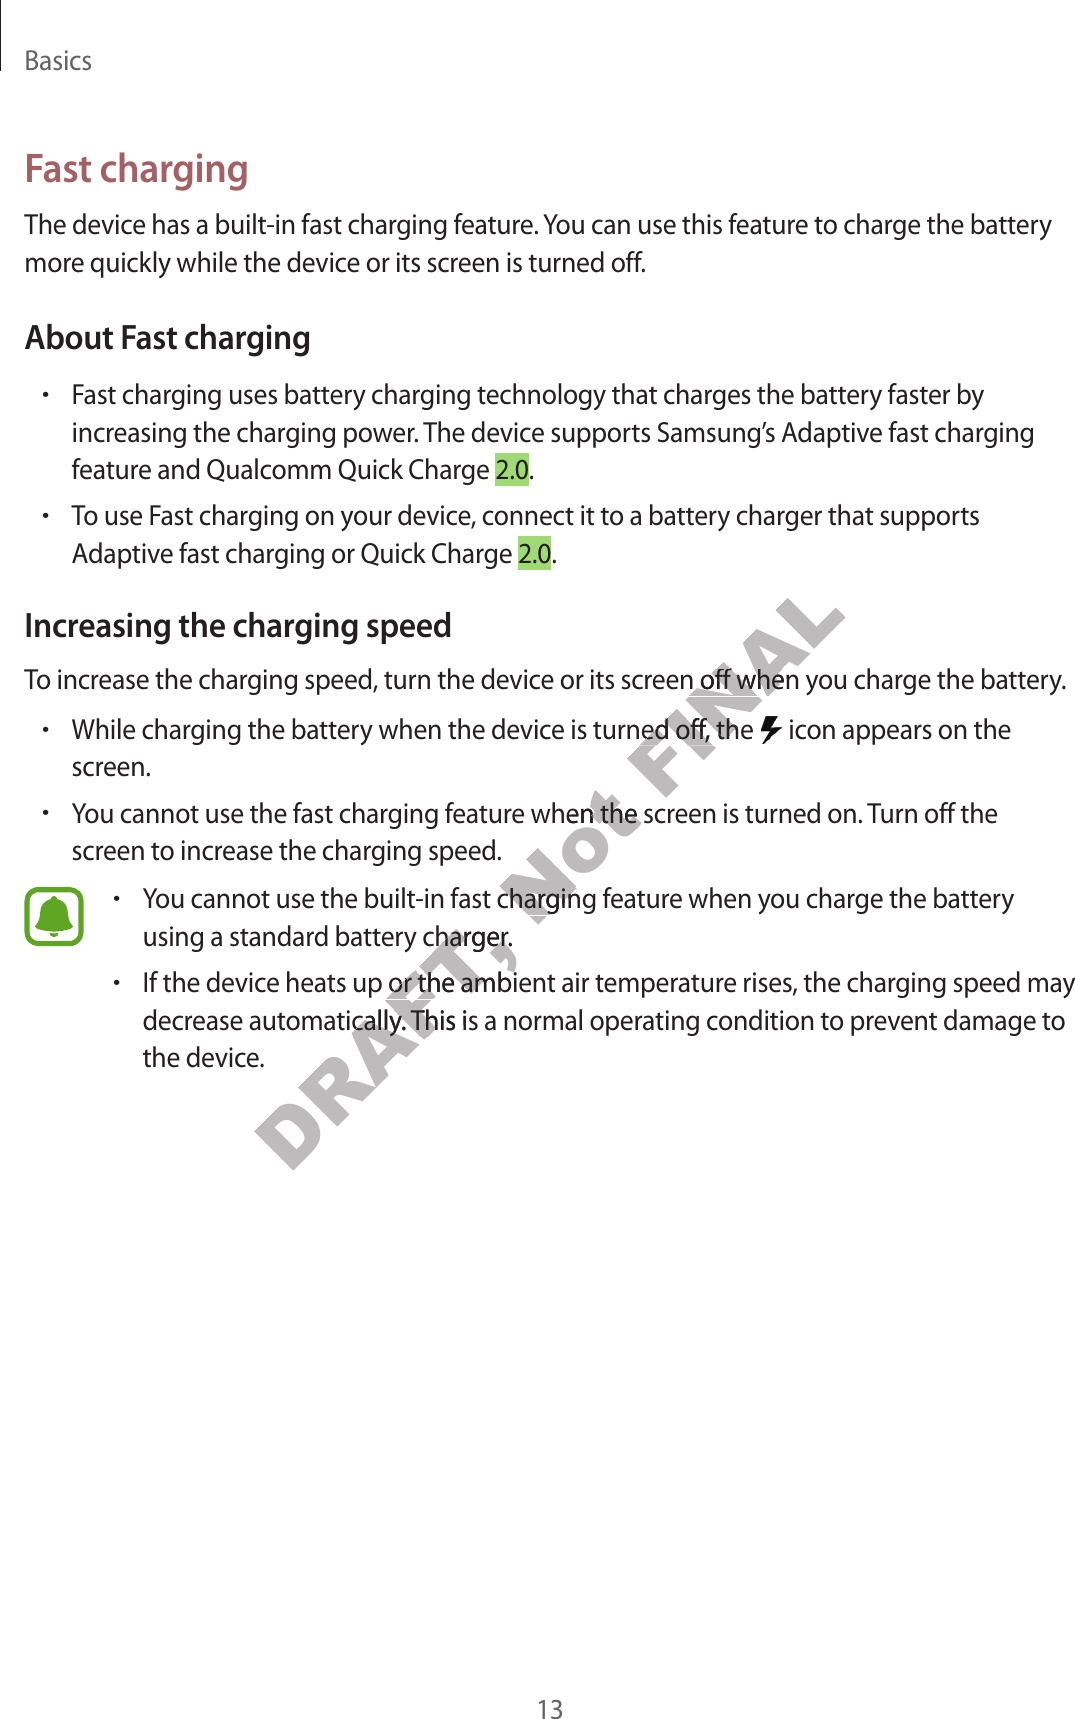 Basics13Fast chargingThe device has a built -in fast charg ing f ea tur e . You can use this featur e to char ge the batt ery more quickly while the device or its screen is turned off.About Fast charging•Fast charging uses ba ttery charging technology that char ges the batt ery faster by increasing the char ging po w er. The device supports Samsung’s Adaptive fast charging featur e and Qualc omm Quick Charge 2.0.•To use Fast charging on y our devic e , c onnect it to a battery charger that supports Adaptiv e fast char ging or Quick Char ge 2.0.Increasing the charg ing speedTo increase the char ging speed , turn the device or its scr een off when y ou char ge the ba ttery.•While charg ing the batt ery when the device is turned off , the   icon appears on the screen.•You cannot use the fast charg ing f eatur e when the scr een is turned on. Turn off the screen to incr ease the char g ing speed .•You cannot use the built-in fast char ging f ea tur e when y ou char ge the batt ery using a standard batt ery charger.•If the device heats up or the ambient air tempera tur e rises, the char g ing speed ma y decrease automa tically. This is a normal operating c ondition to pr ev en t damage to the device .DRAFT, You cannot use the built-in fast char ging f ea tur e when y ou char ge the batt ery DRAFT, You cannot use the built-in fast char ging f ea tur e when y ou char ge the batt ery DRAFT, using a standard batt ery charger.DRAFT, using a standard batt ery charger.If the device heats up or the ambient air tempera tur e rises, the char g ing speed ma y DRAFT, If the device heats up or the ambient air tempera tur e rises, the char g ing speed ma y DRAFT, decrease automa tically. This is a normal operating c ondition to pr ev en t damage to DRAFT, decrease automa tically. This is a normal operating c ondition to pr ev en t damage to Not You cannot use the fast charg ing f eatur e when the scr een is turned on. Turn off the Not You cannot use the fast charg ing f eatur e when the scr een is turned on. Turn off the You cannot use the built-in fast char ging f ea tur e when y ou char ge the batt ery Not You cannot use the built-in fast char ging f ea tur e when y ou char ge the batt ery FINALTo increase the char ging speed , turn the device or its scr een off when y ou char ge the ba ttery.FINALTo increase the char ging speed , turn the device or its scr een off when y ou char ge the ba ttery.While charg ing the batt ery when the device is turned off , the FINALWhile charg ing the batt ery when the device is turned off , the 